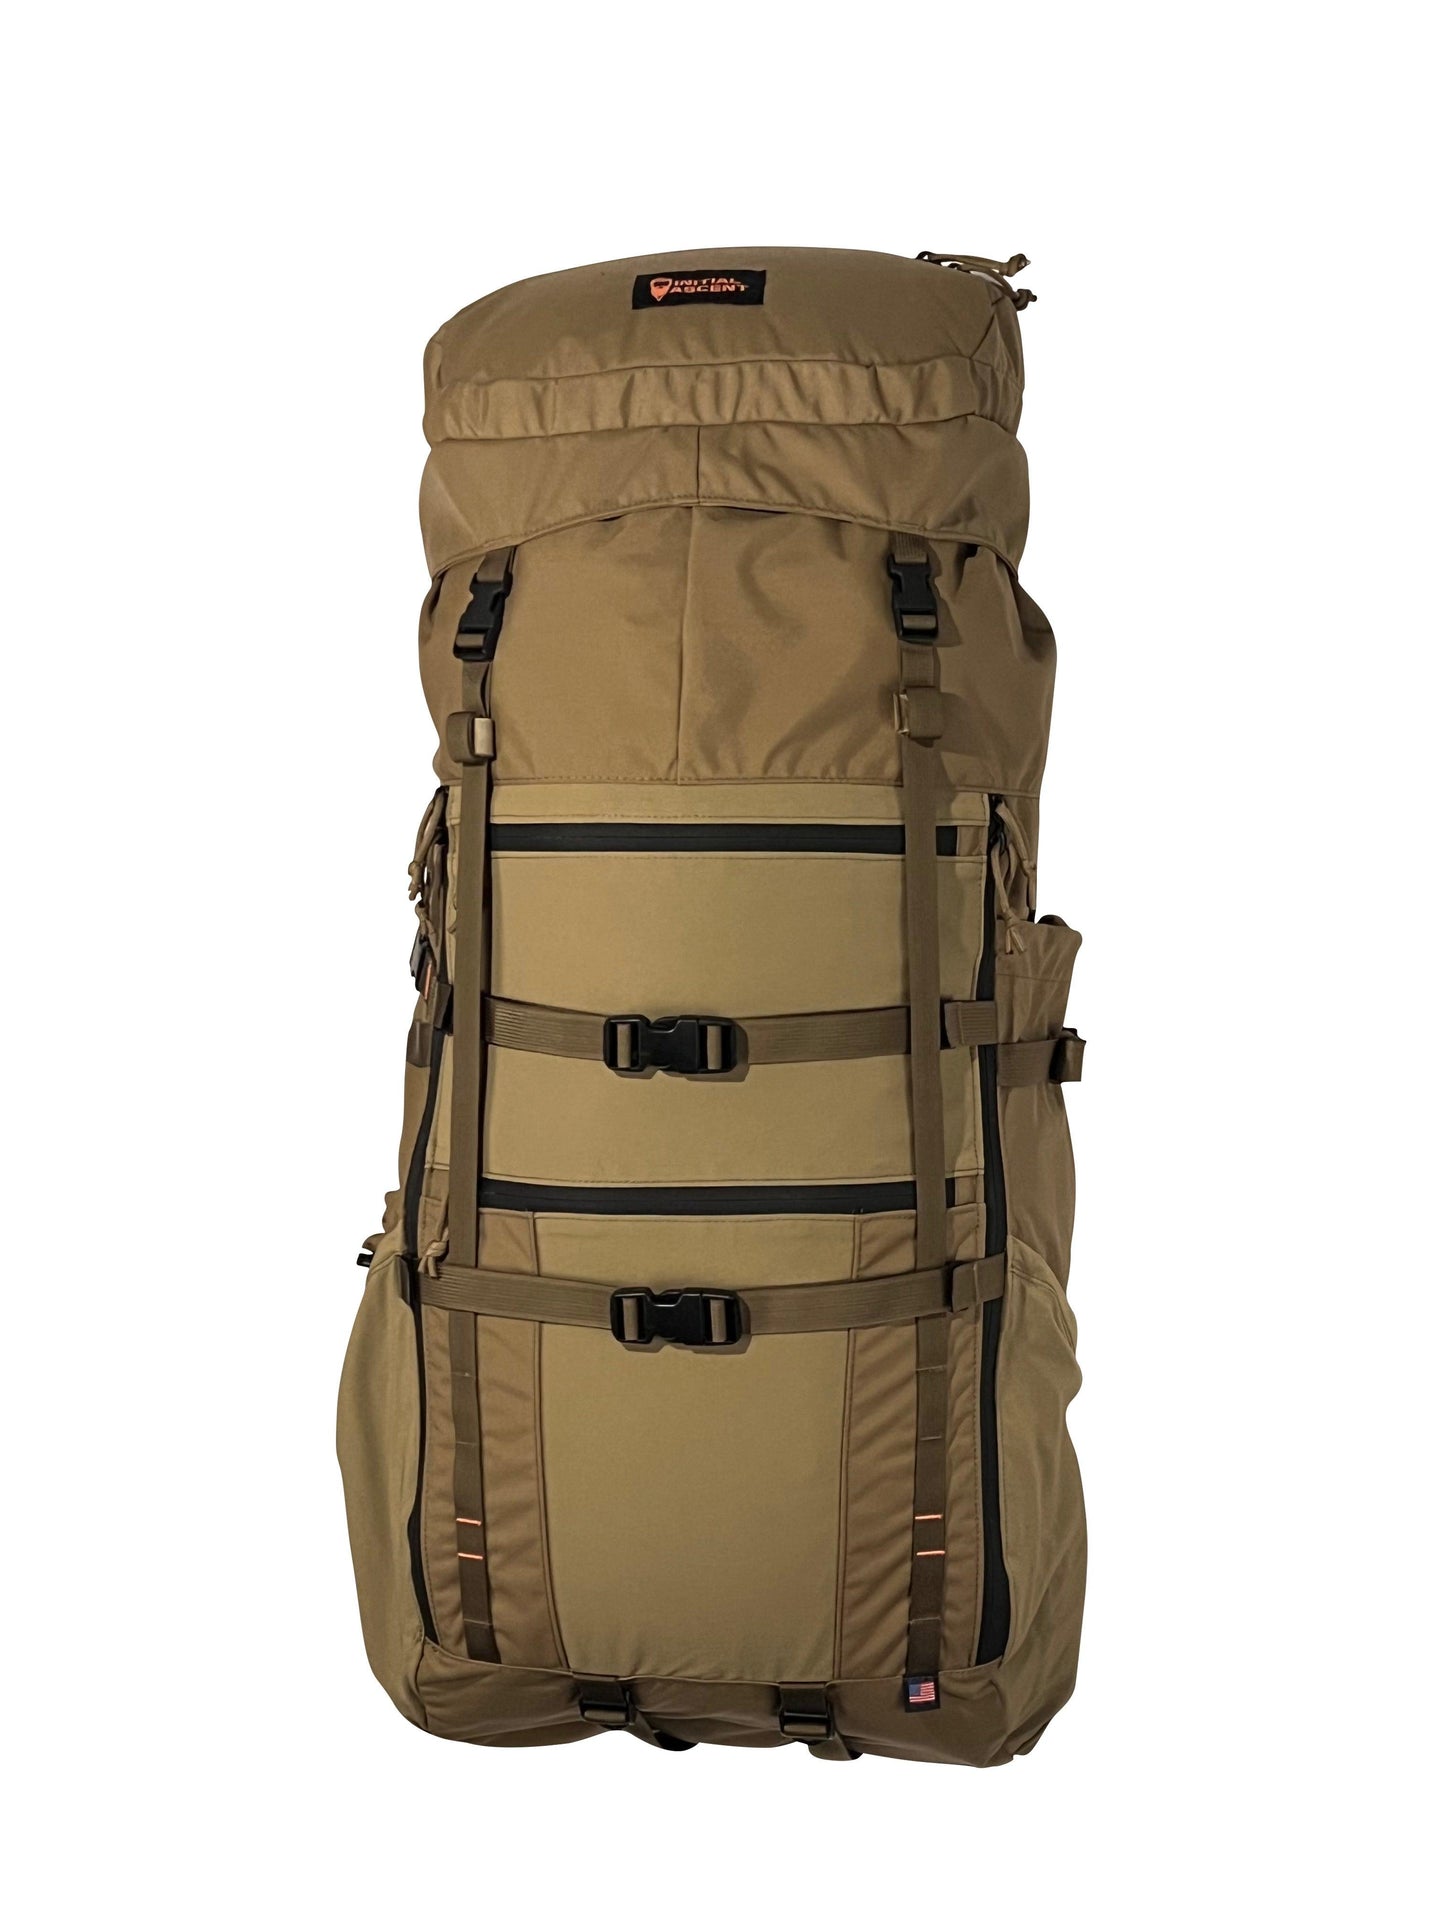 IA6K Bag Only - Initial Ascent